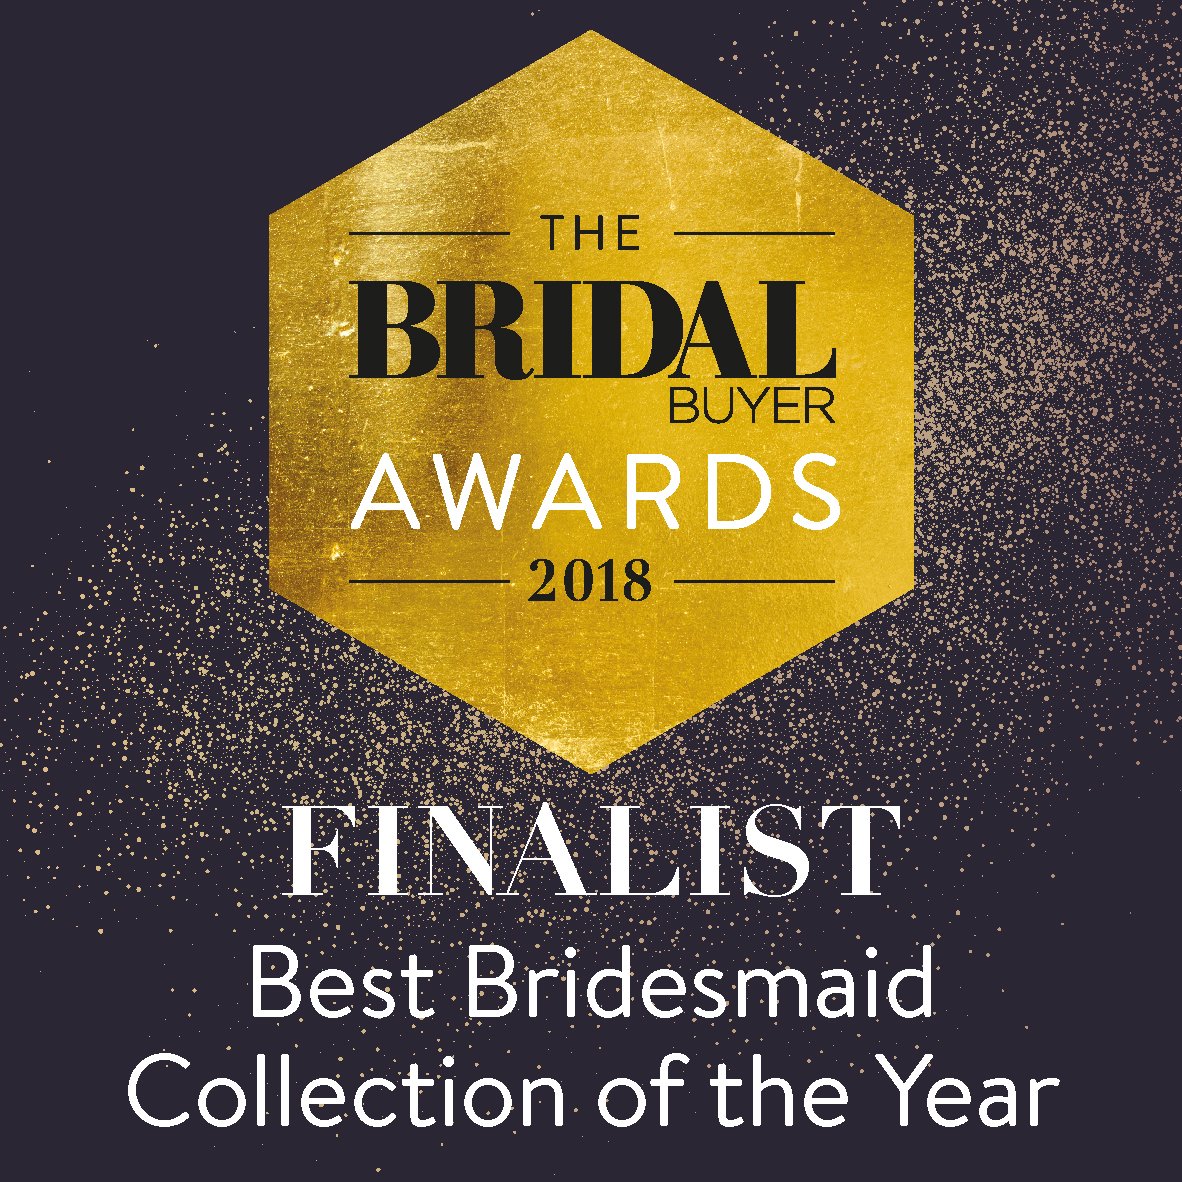 Finalist Best Bridesmaid Collection of the Year 2018